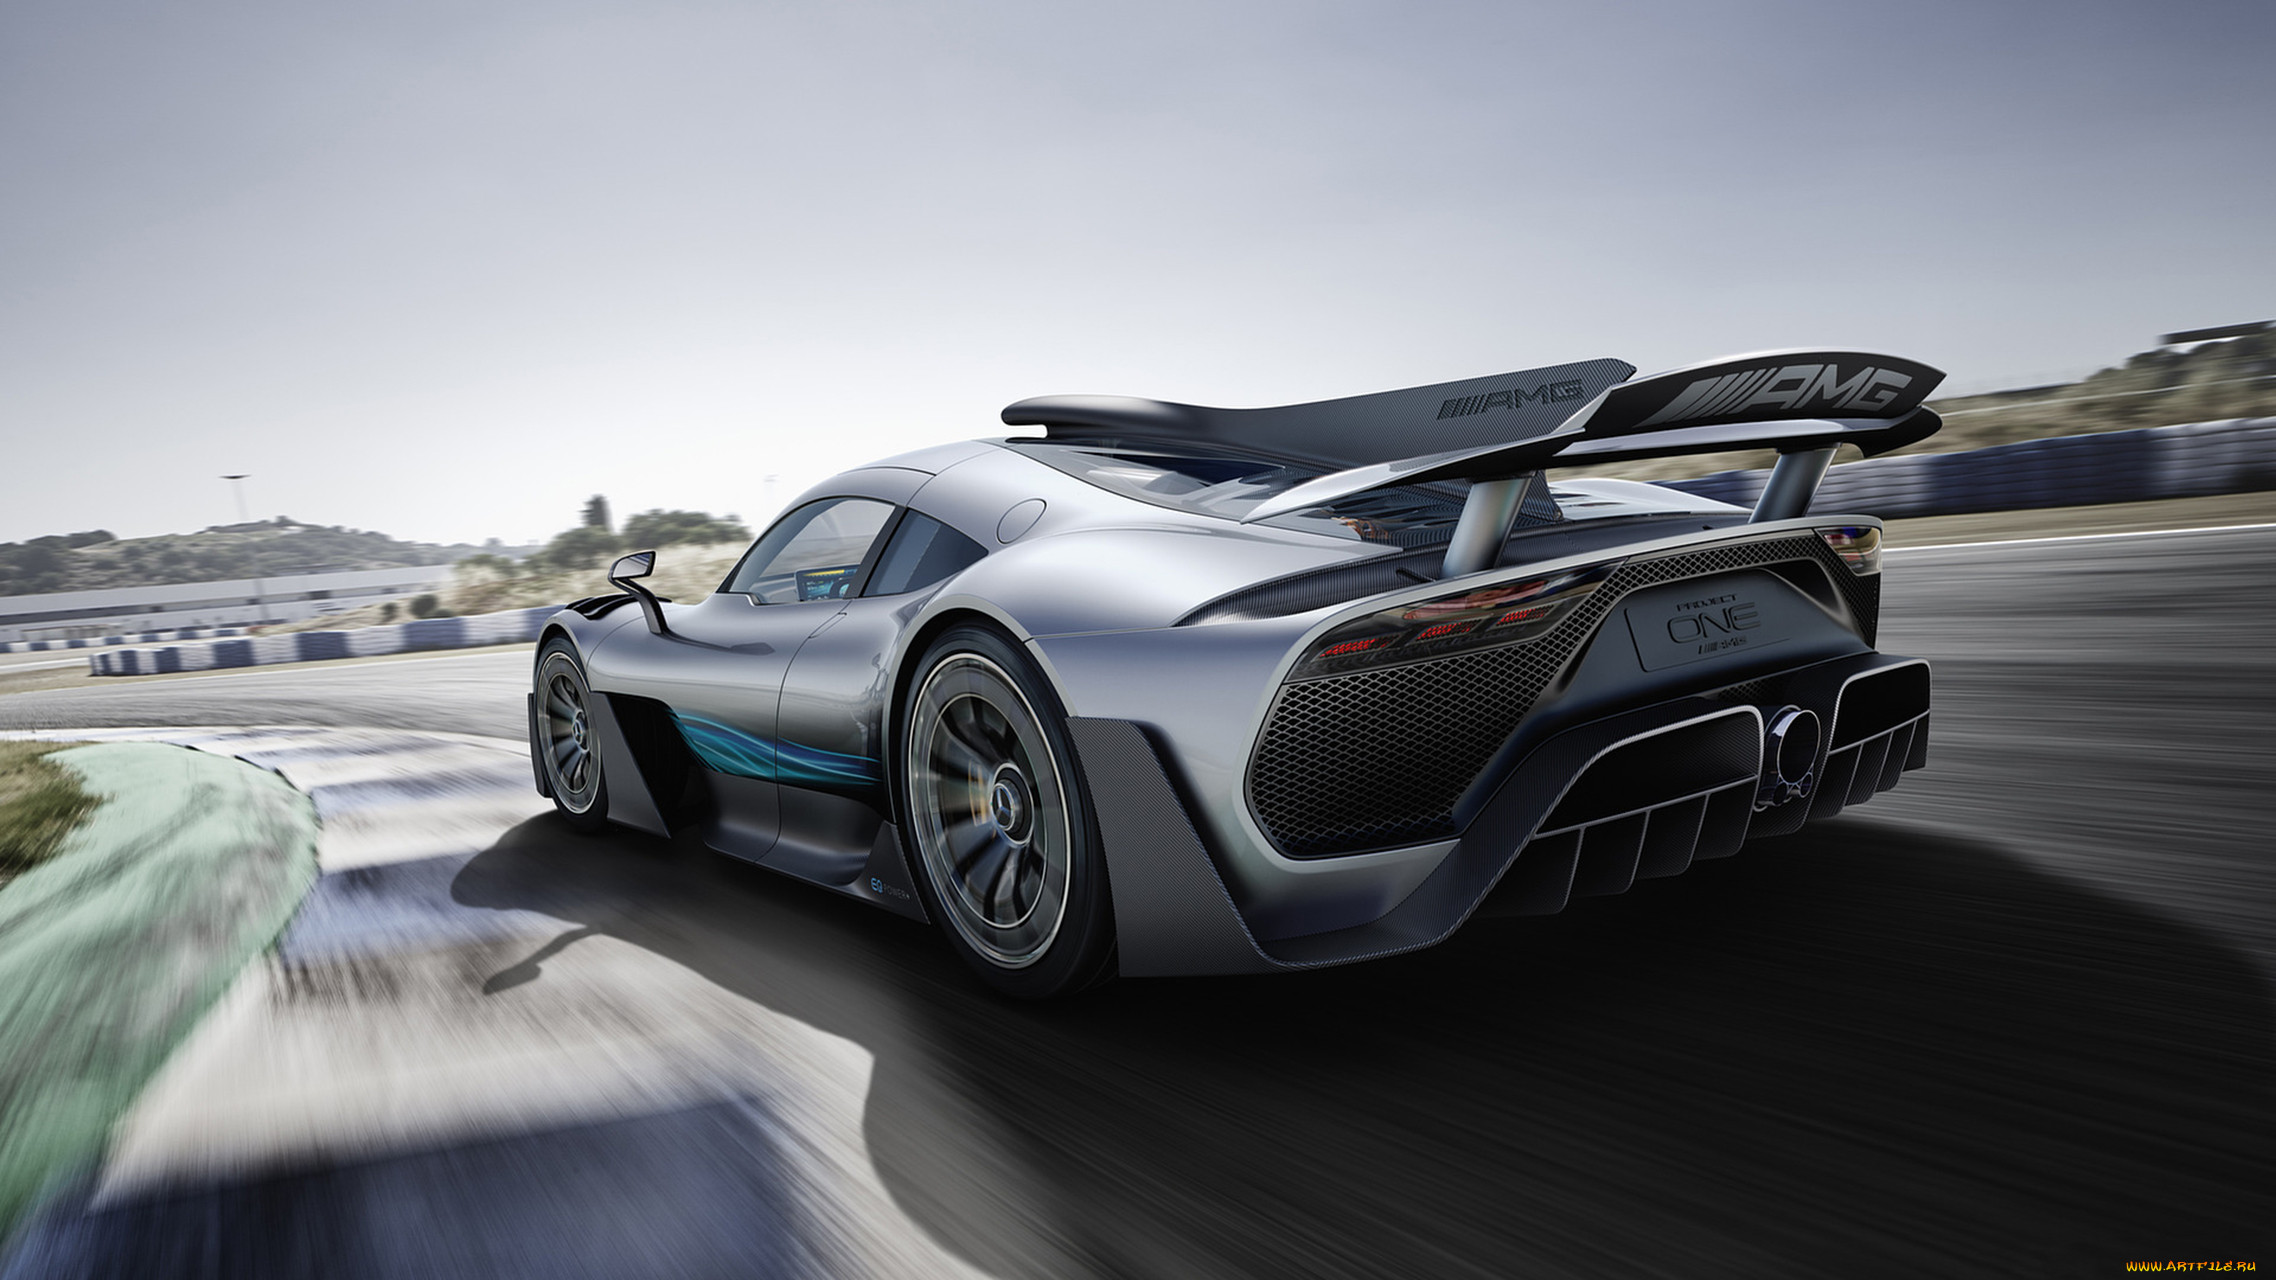 mercedes-benz amg project one 2017, , mercedes-benz, project, amg, 2017, one